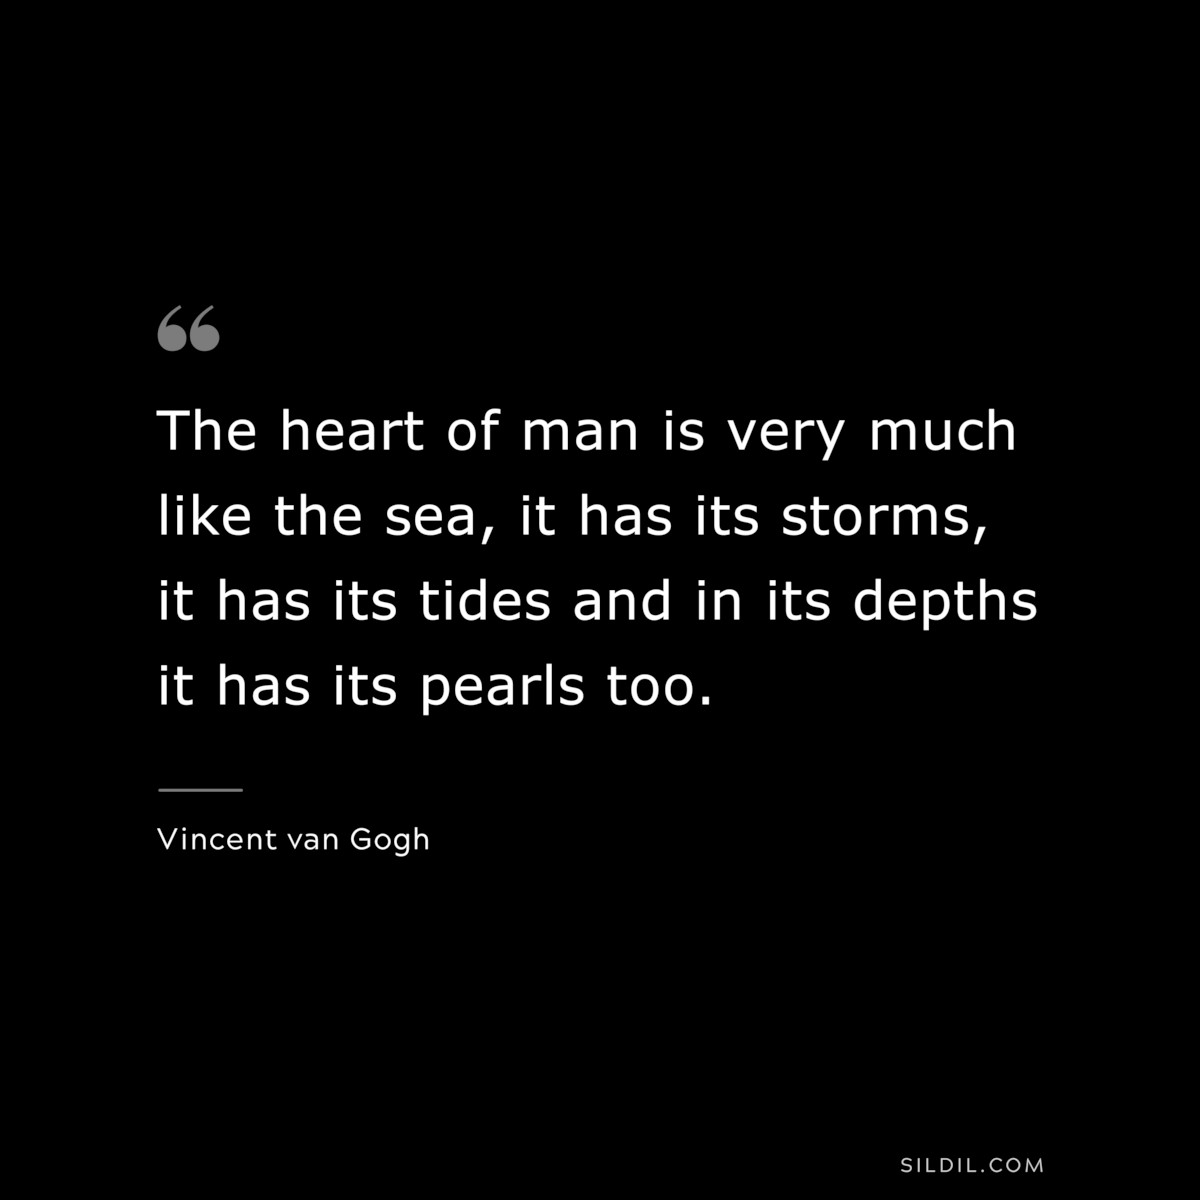 The heart of man is very much like the sea, it has its storms, it has its tides and in its depths it has its pearls too. ― Vincent van Gogh